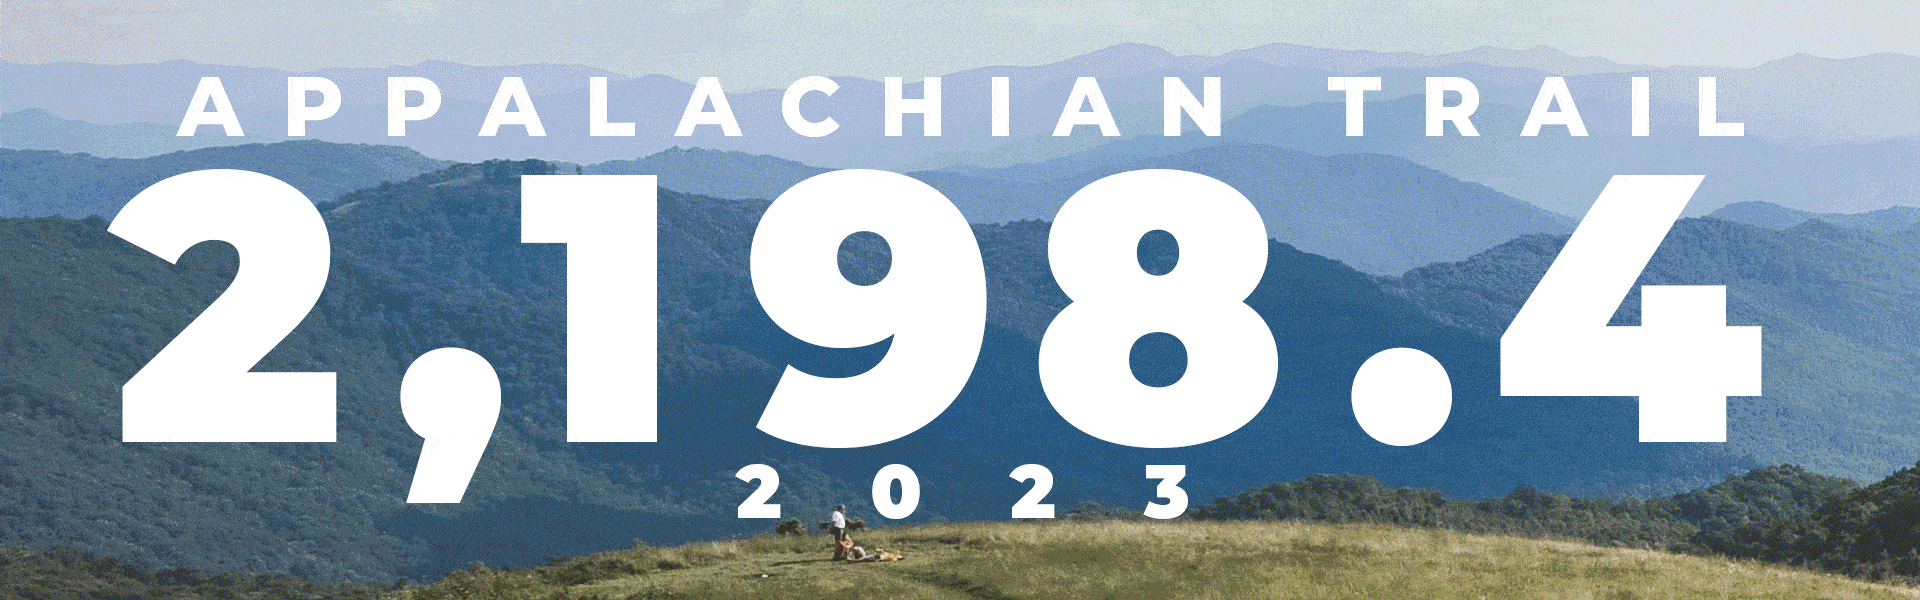 The Appalachian Trail will officially be 2,198.4 miles long in 2023.